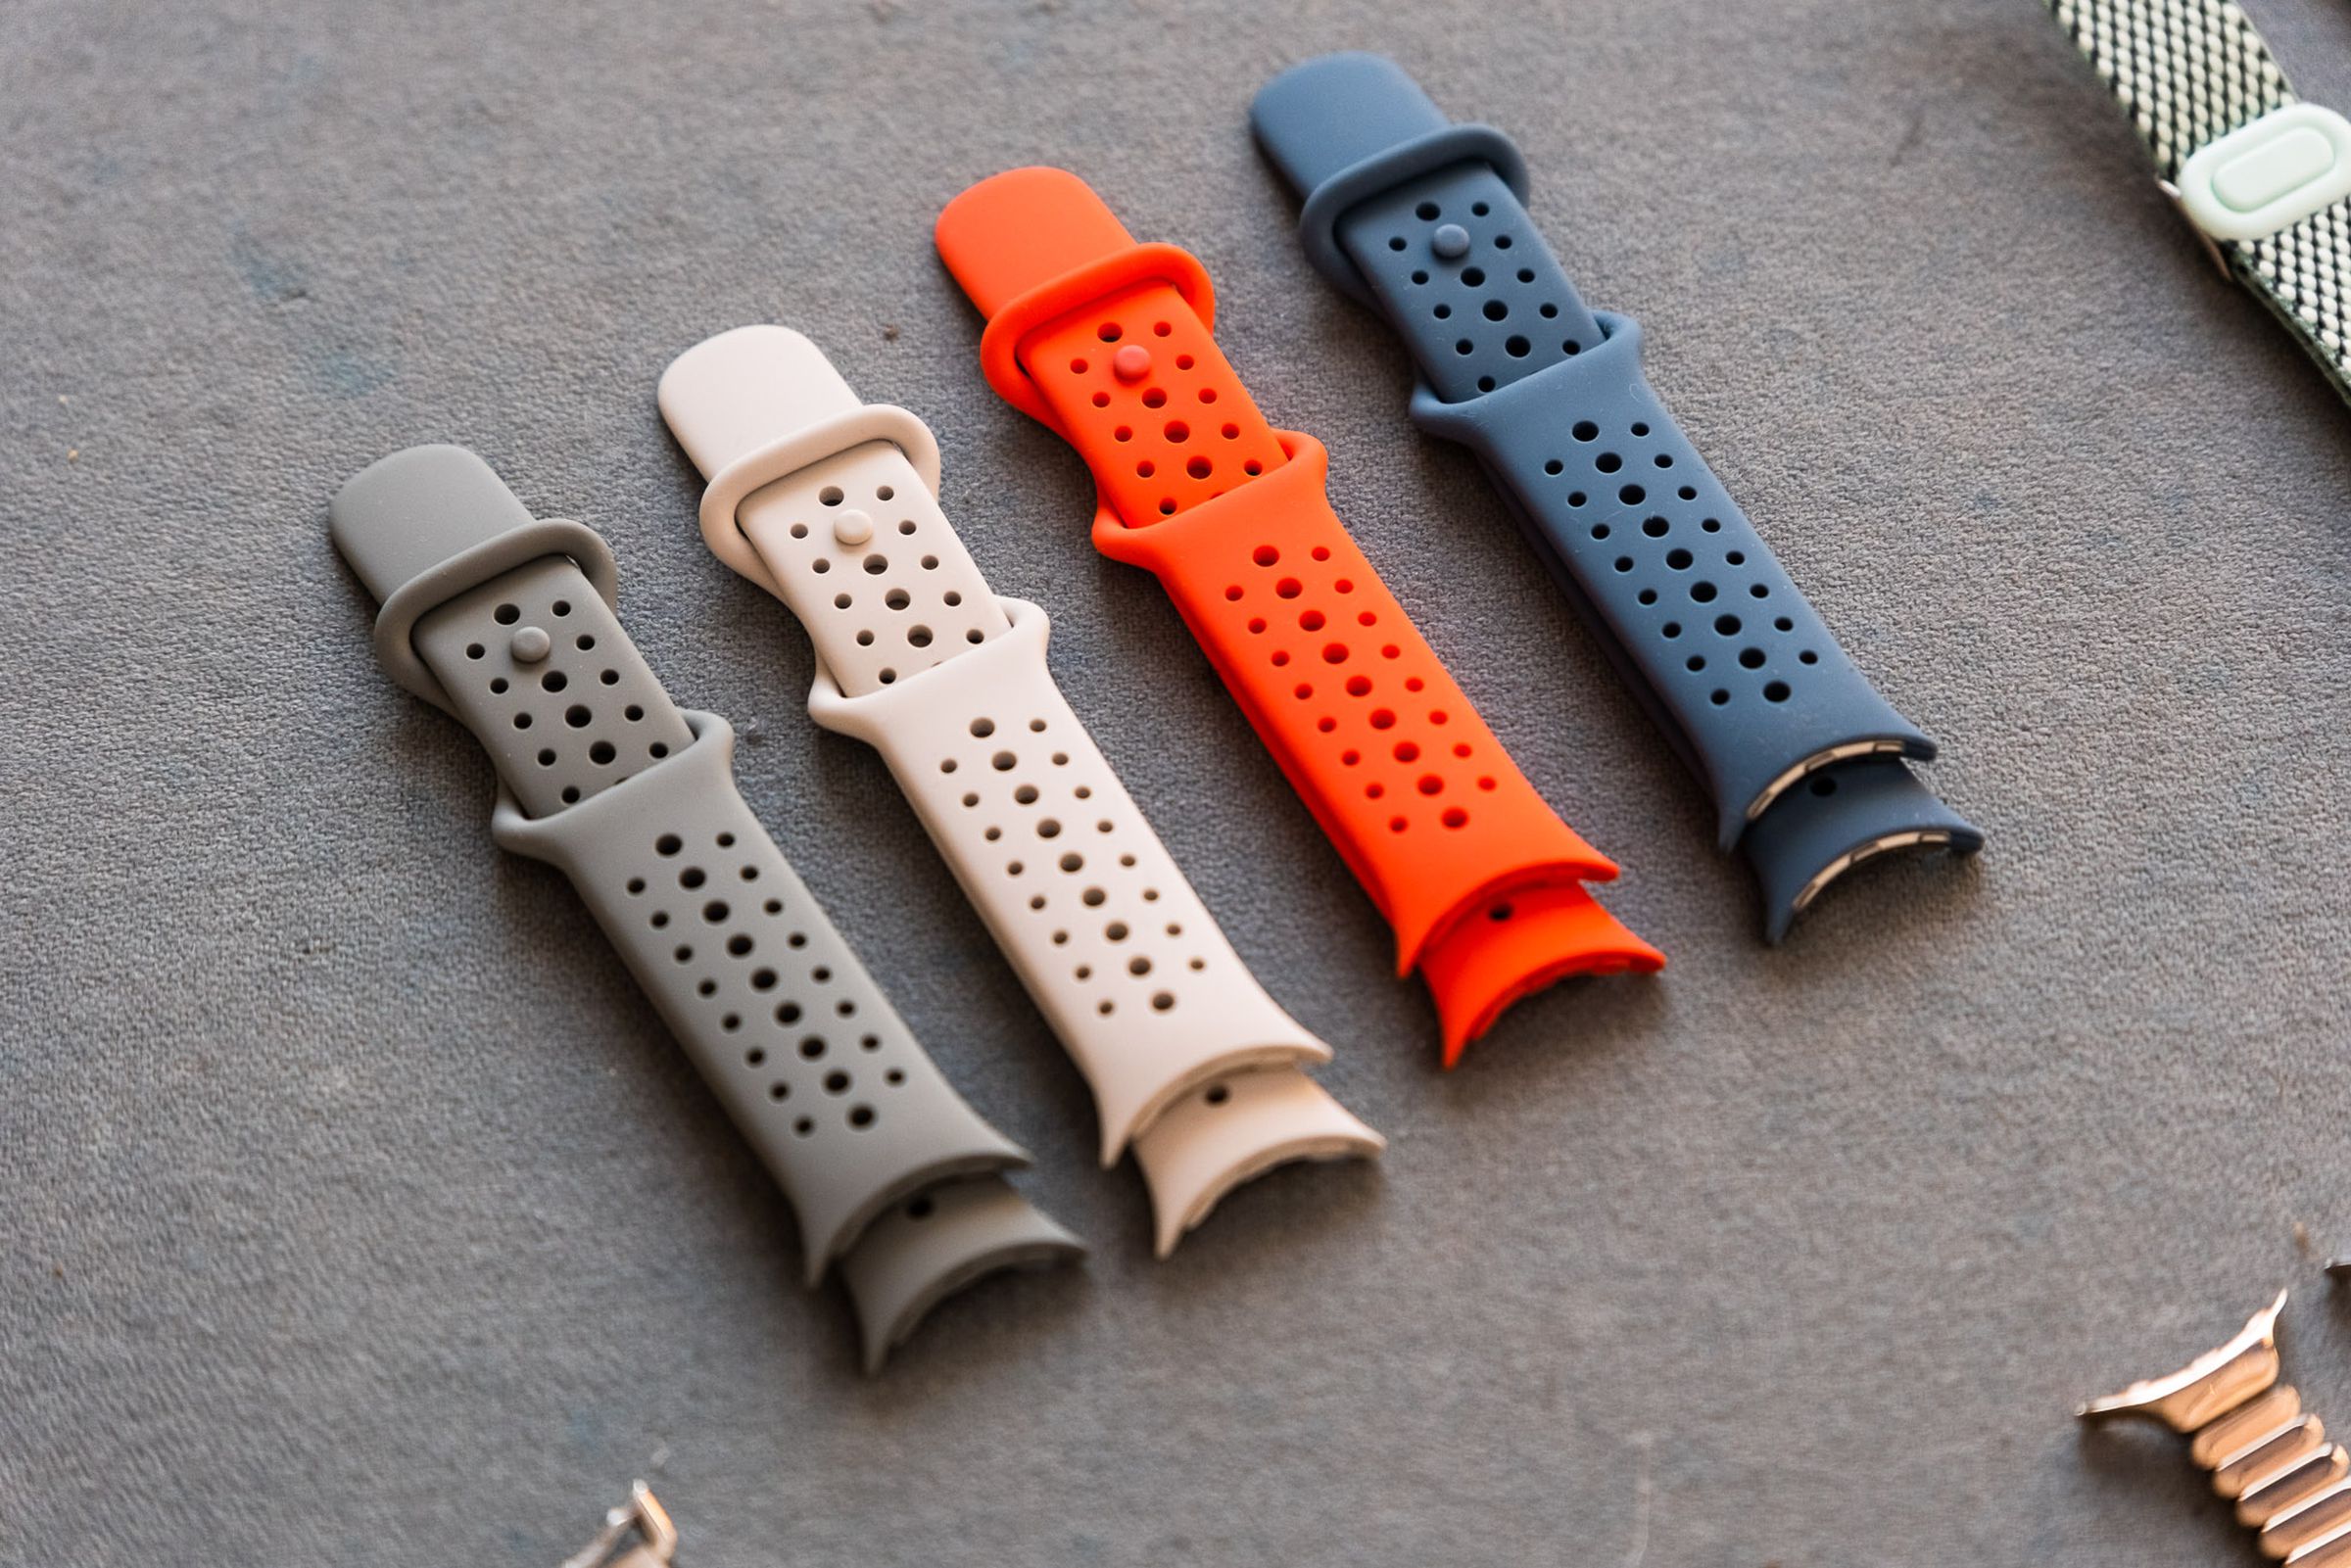 New active sport bands for the Pixel Watch 2 side by side